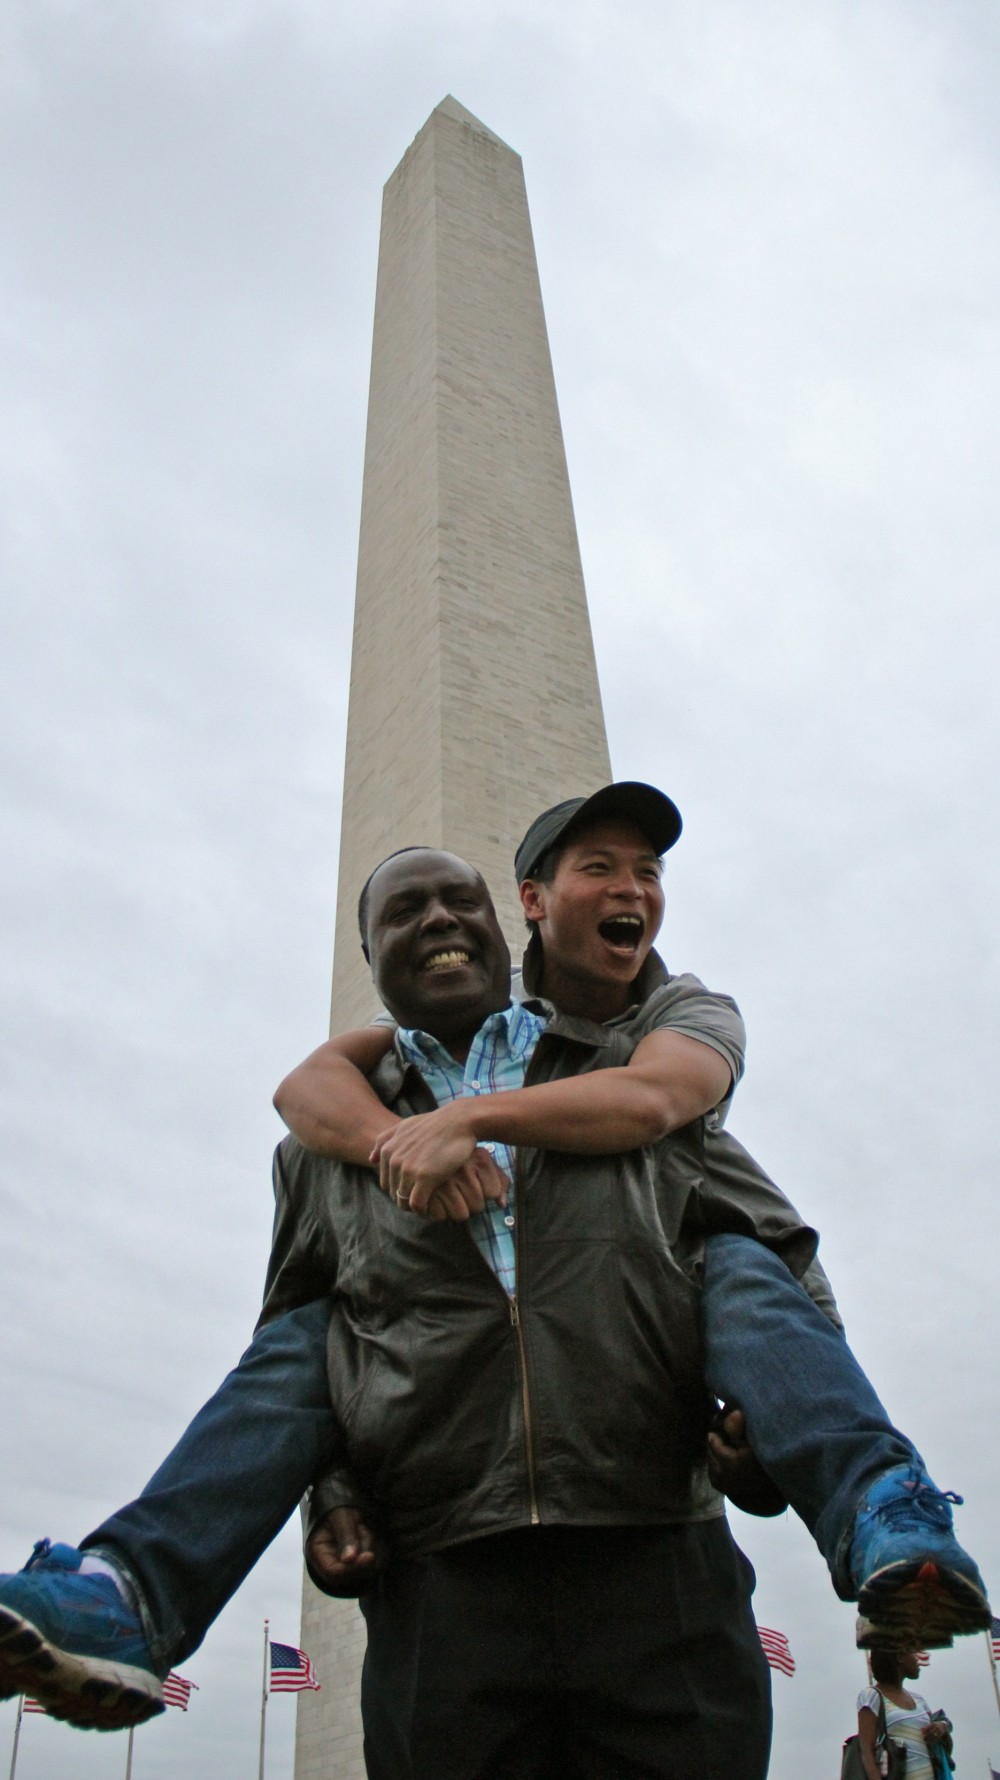 George Kalimbwe, faculty member at Evelyn Hone College, Zambia, with fellow 2015 SUSI scholar, Bruce Lui, in Washington D.C.